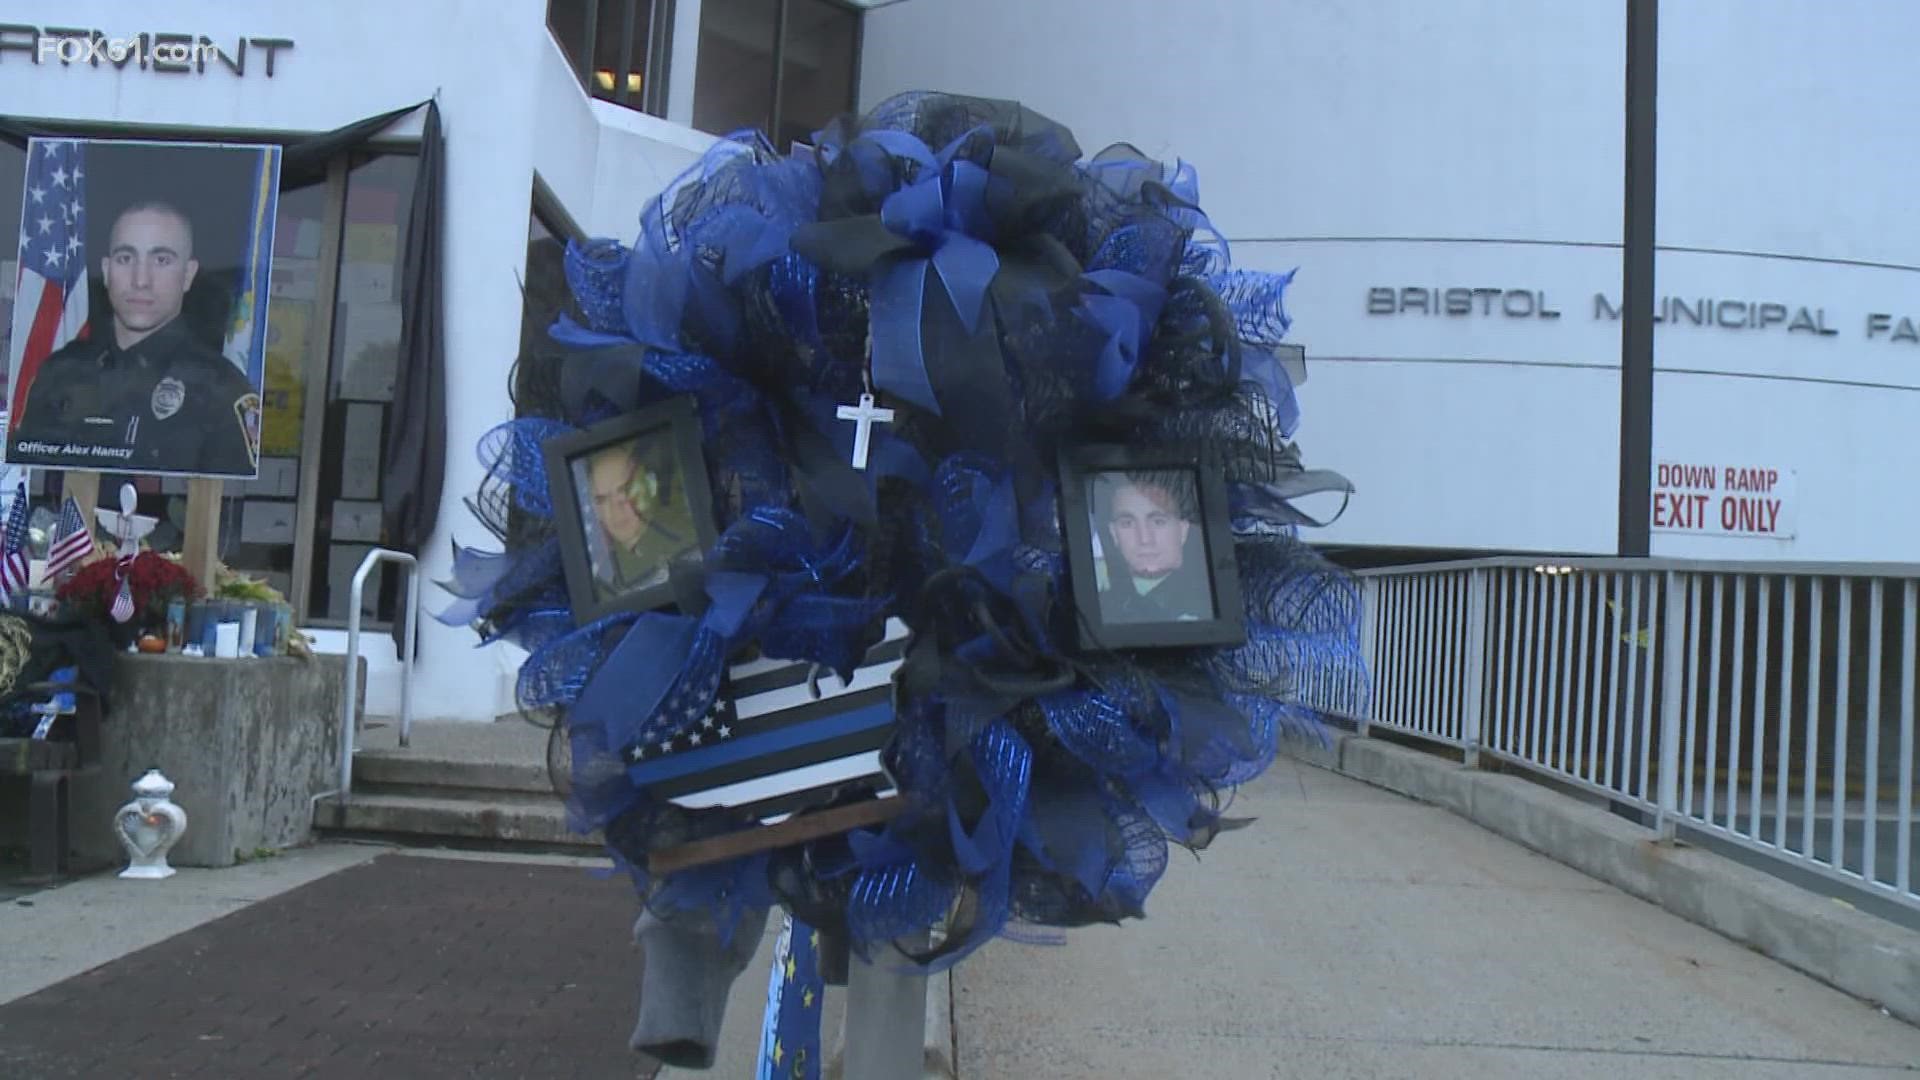 A joint funeral service will be held Friday at Pratt and Whitney Stadium at Rentschler Field in East Hartford for fallen Bristol police officers.